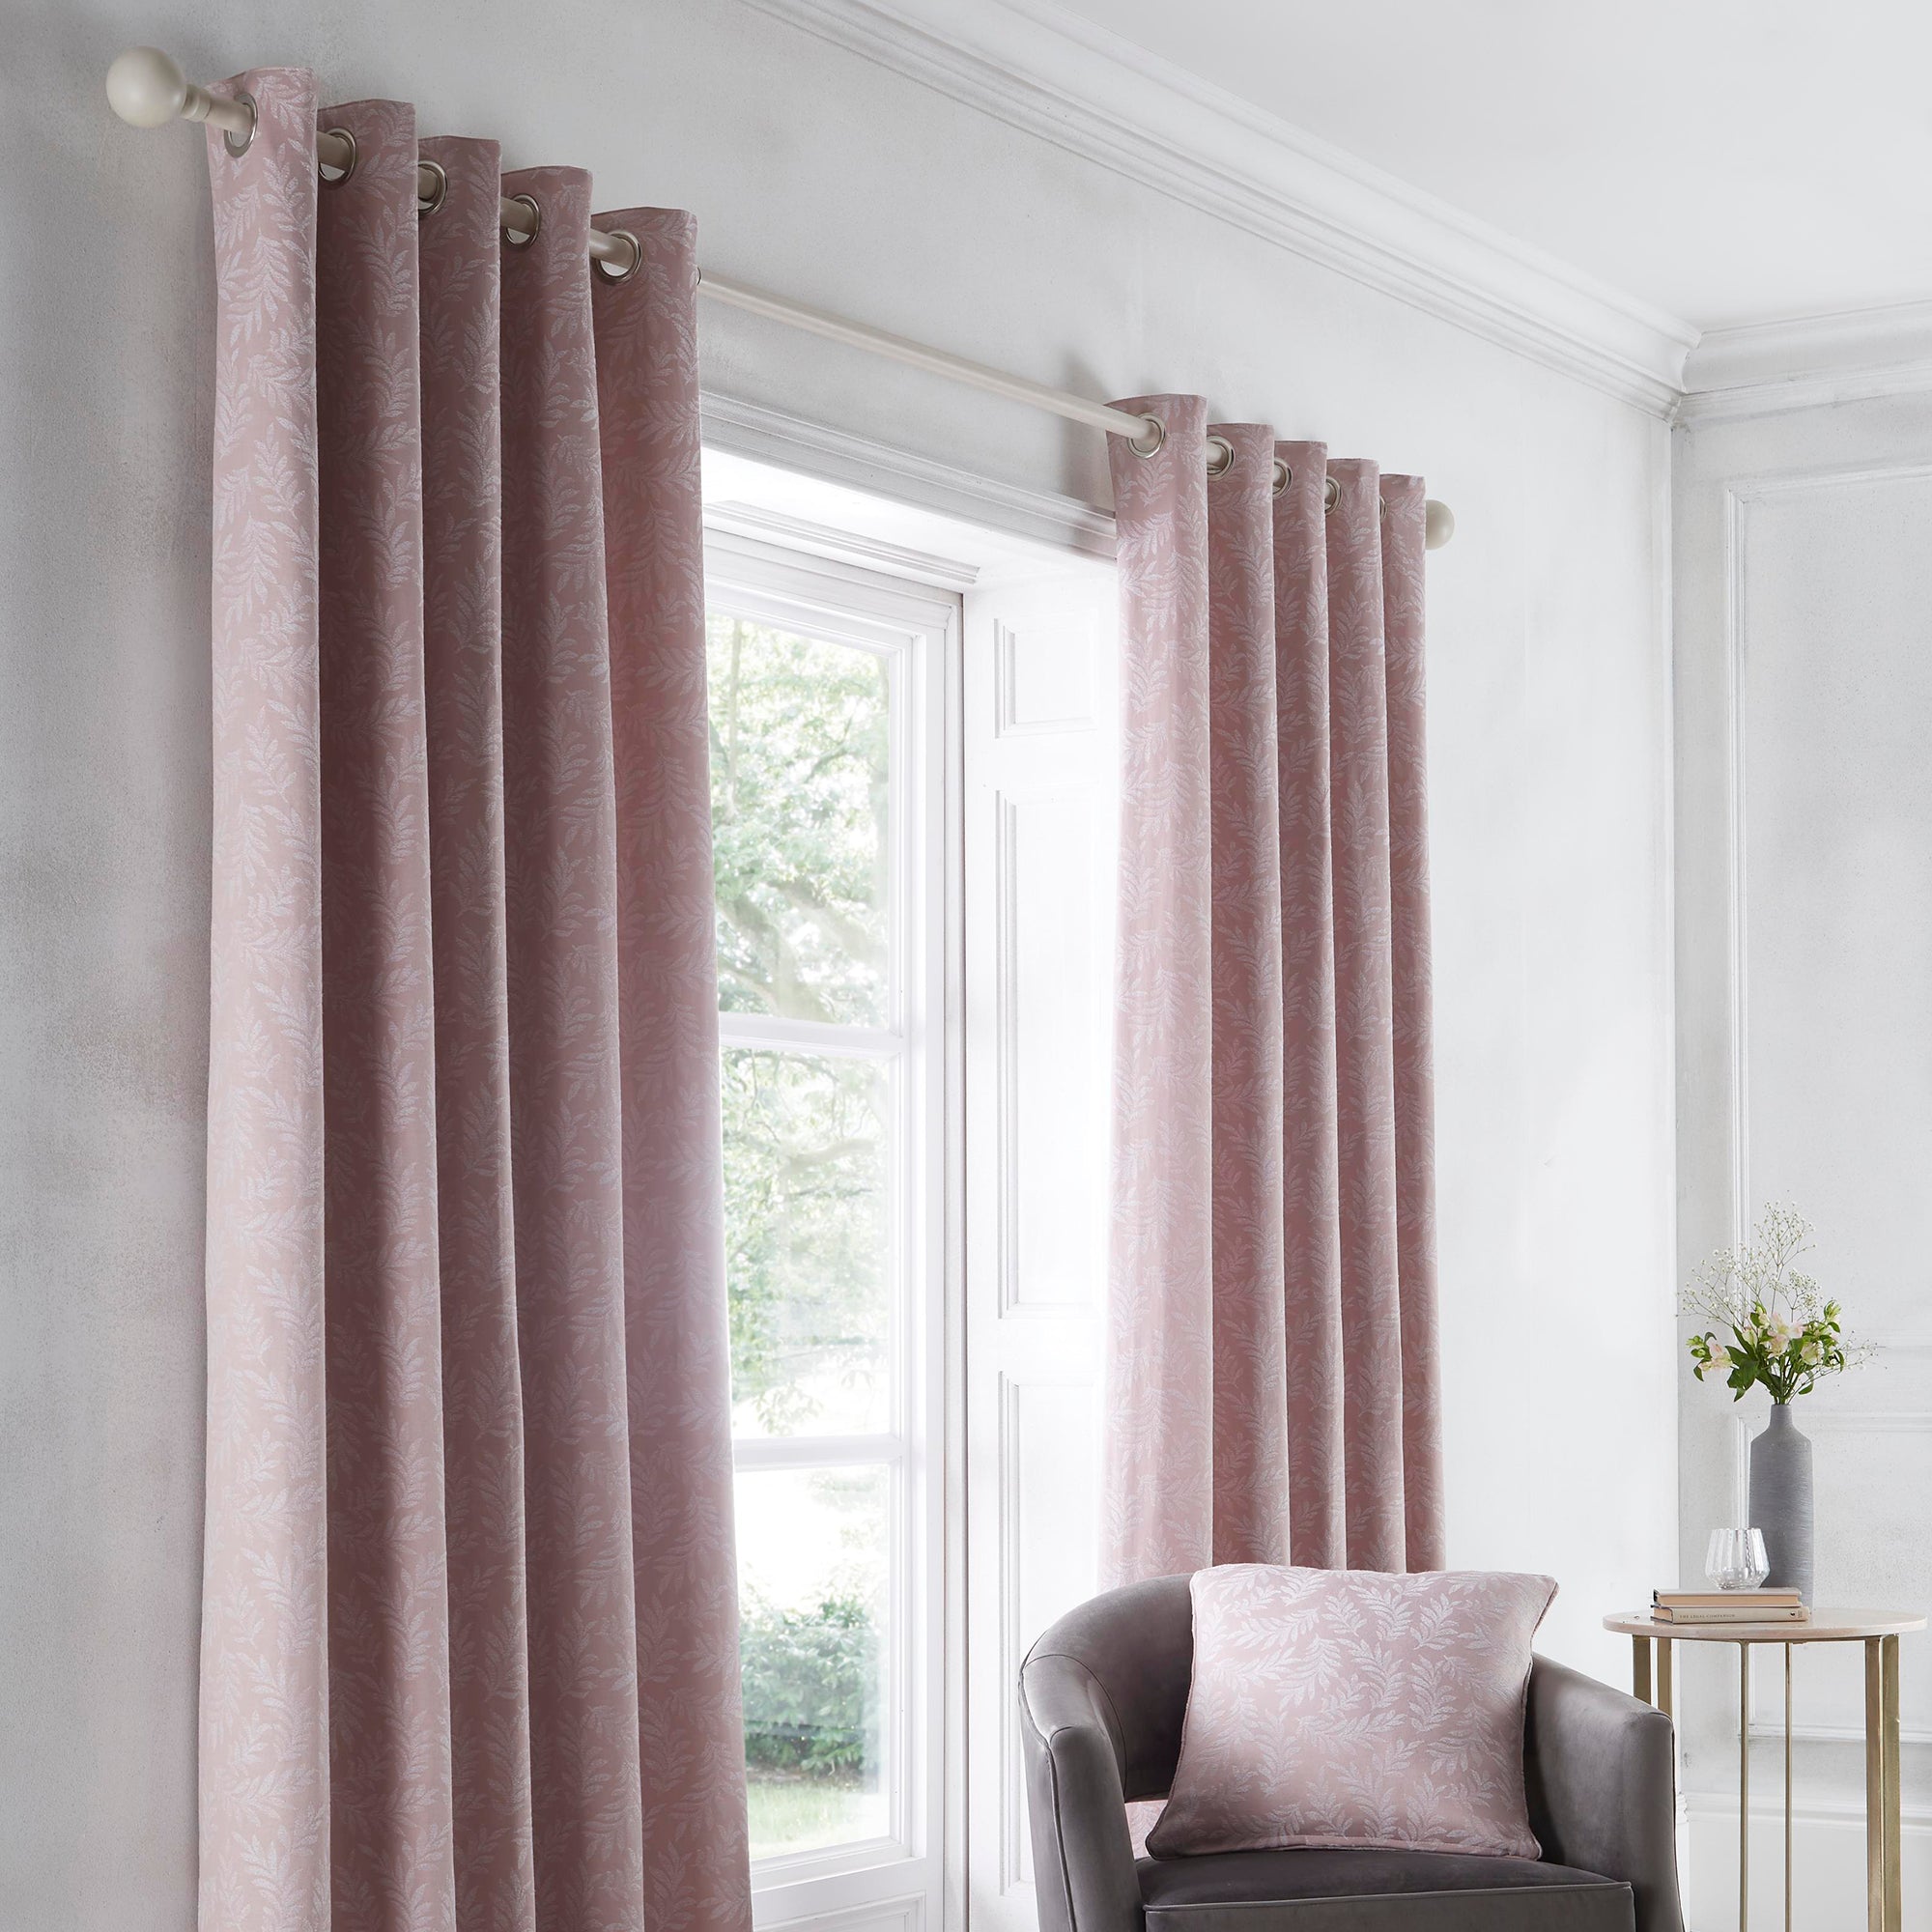 Telford - Jacquard Pair of Eyelet Curtains in Blush - by D&D Design